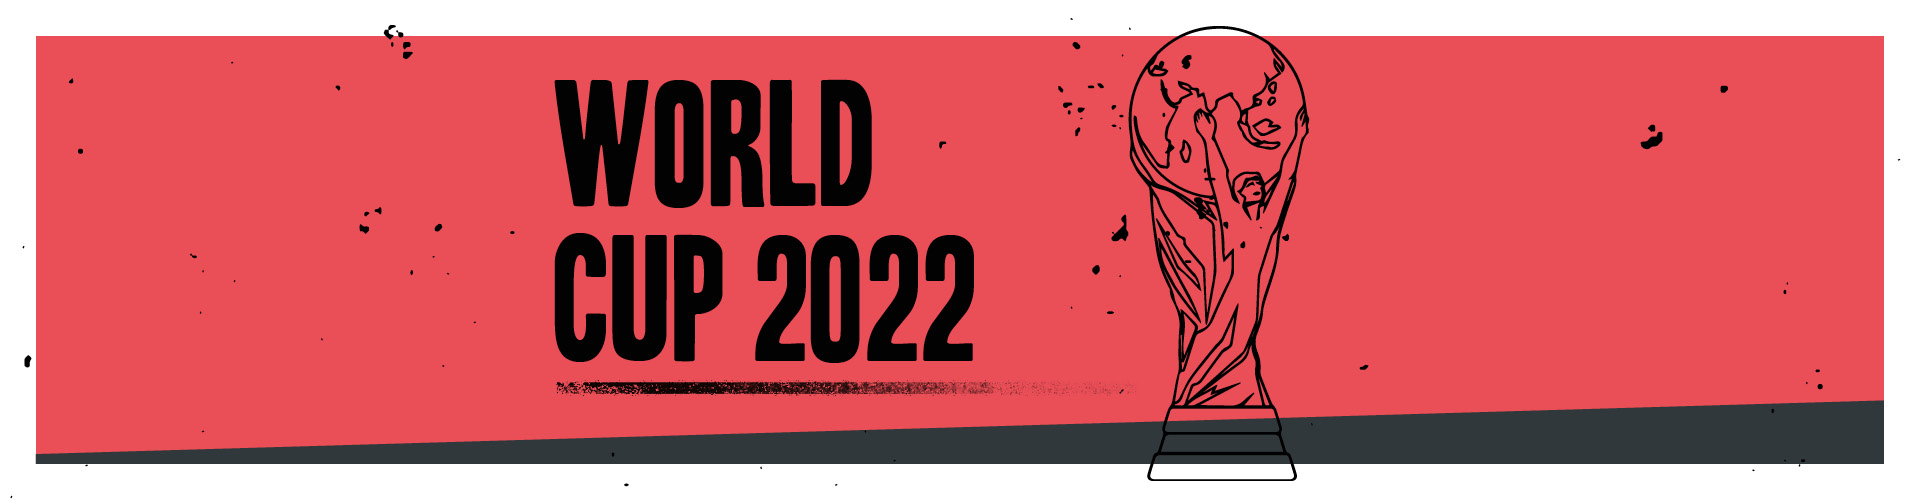 World Cup 2022 and World Cup Trophy